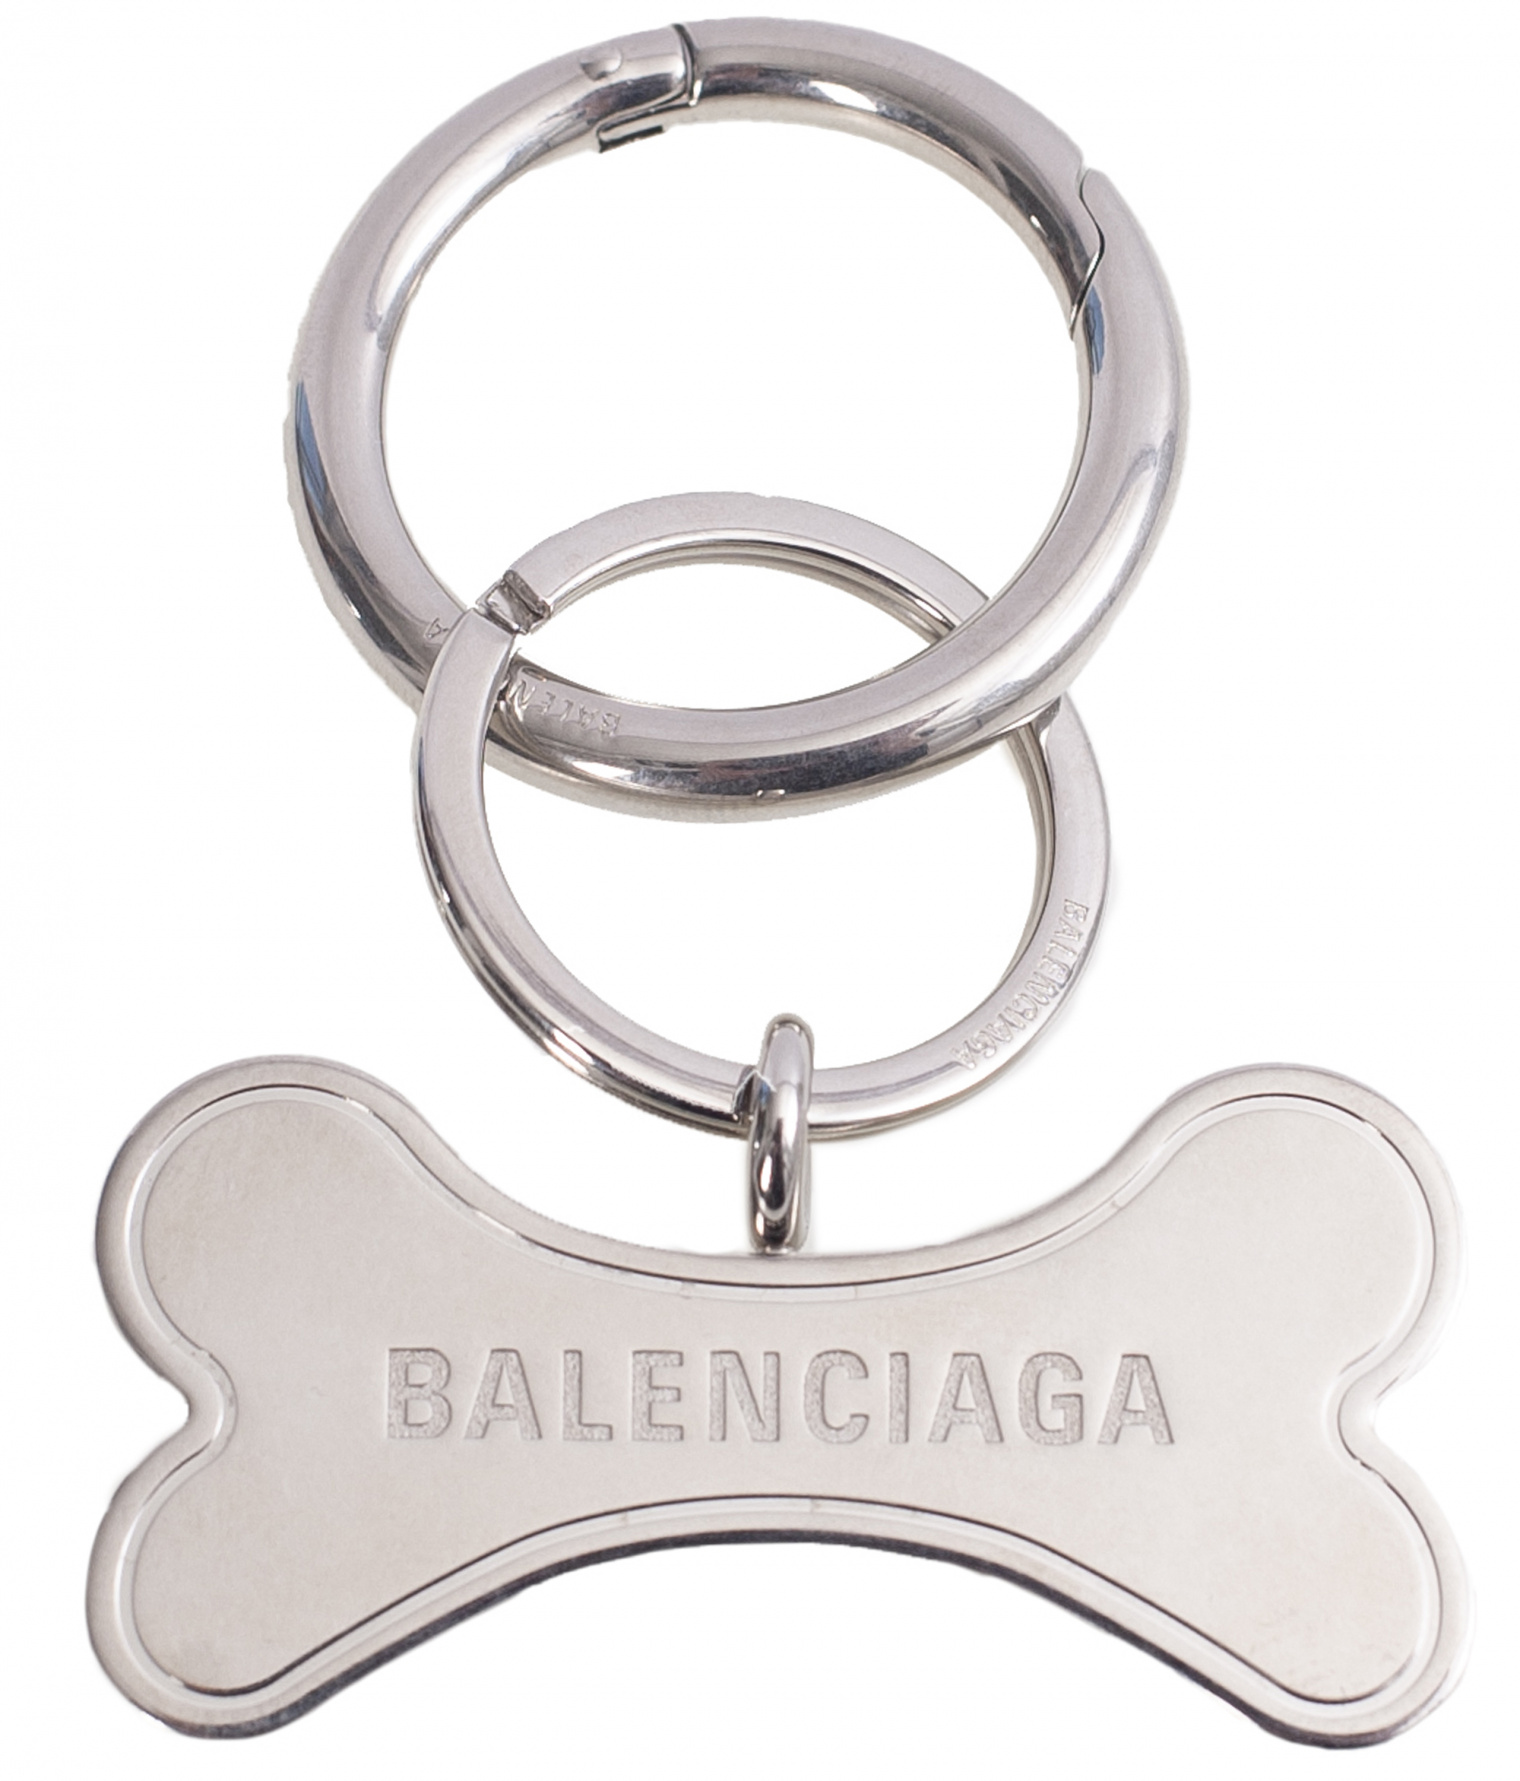 Balenciaga women silver keychain with charm for $440 online on SV77, 637480/TZ8ZI/0668